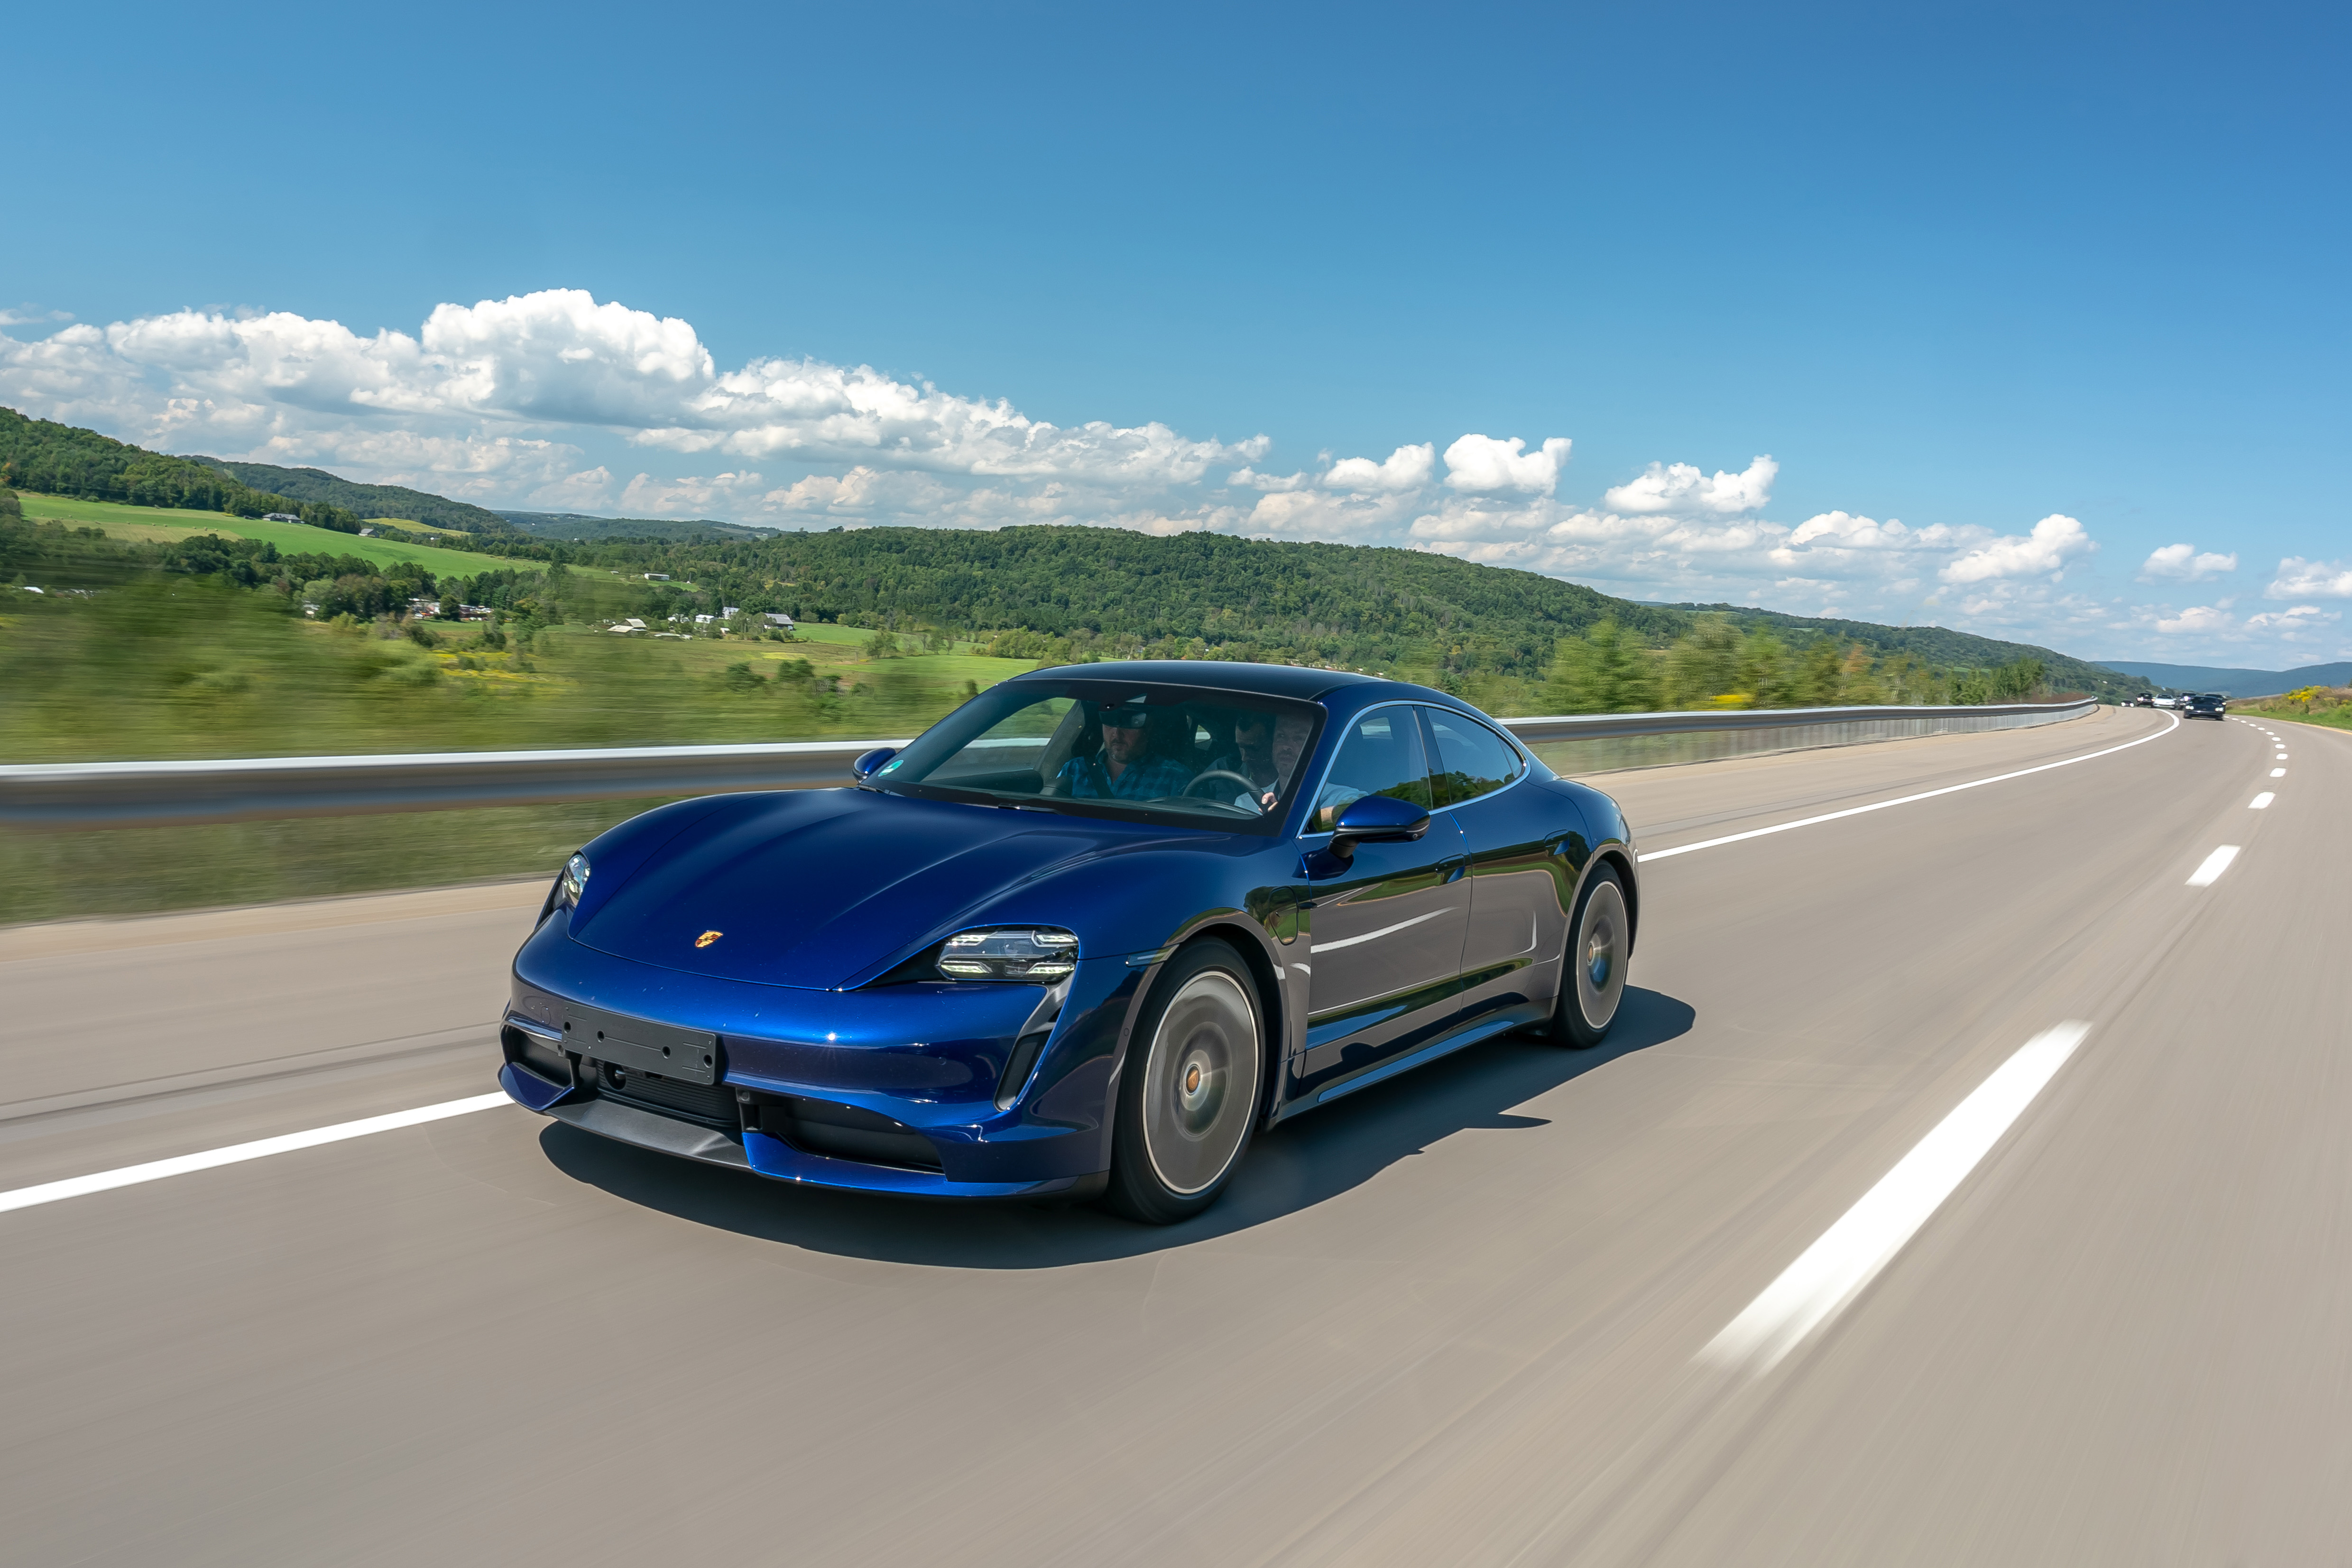 Porsche Taycan Turbo hits the road for the first time, Taycan Turbo, 2019, PCNA